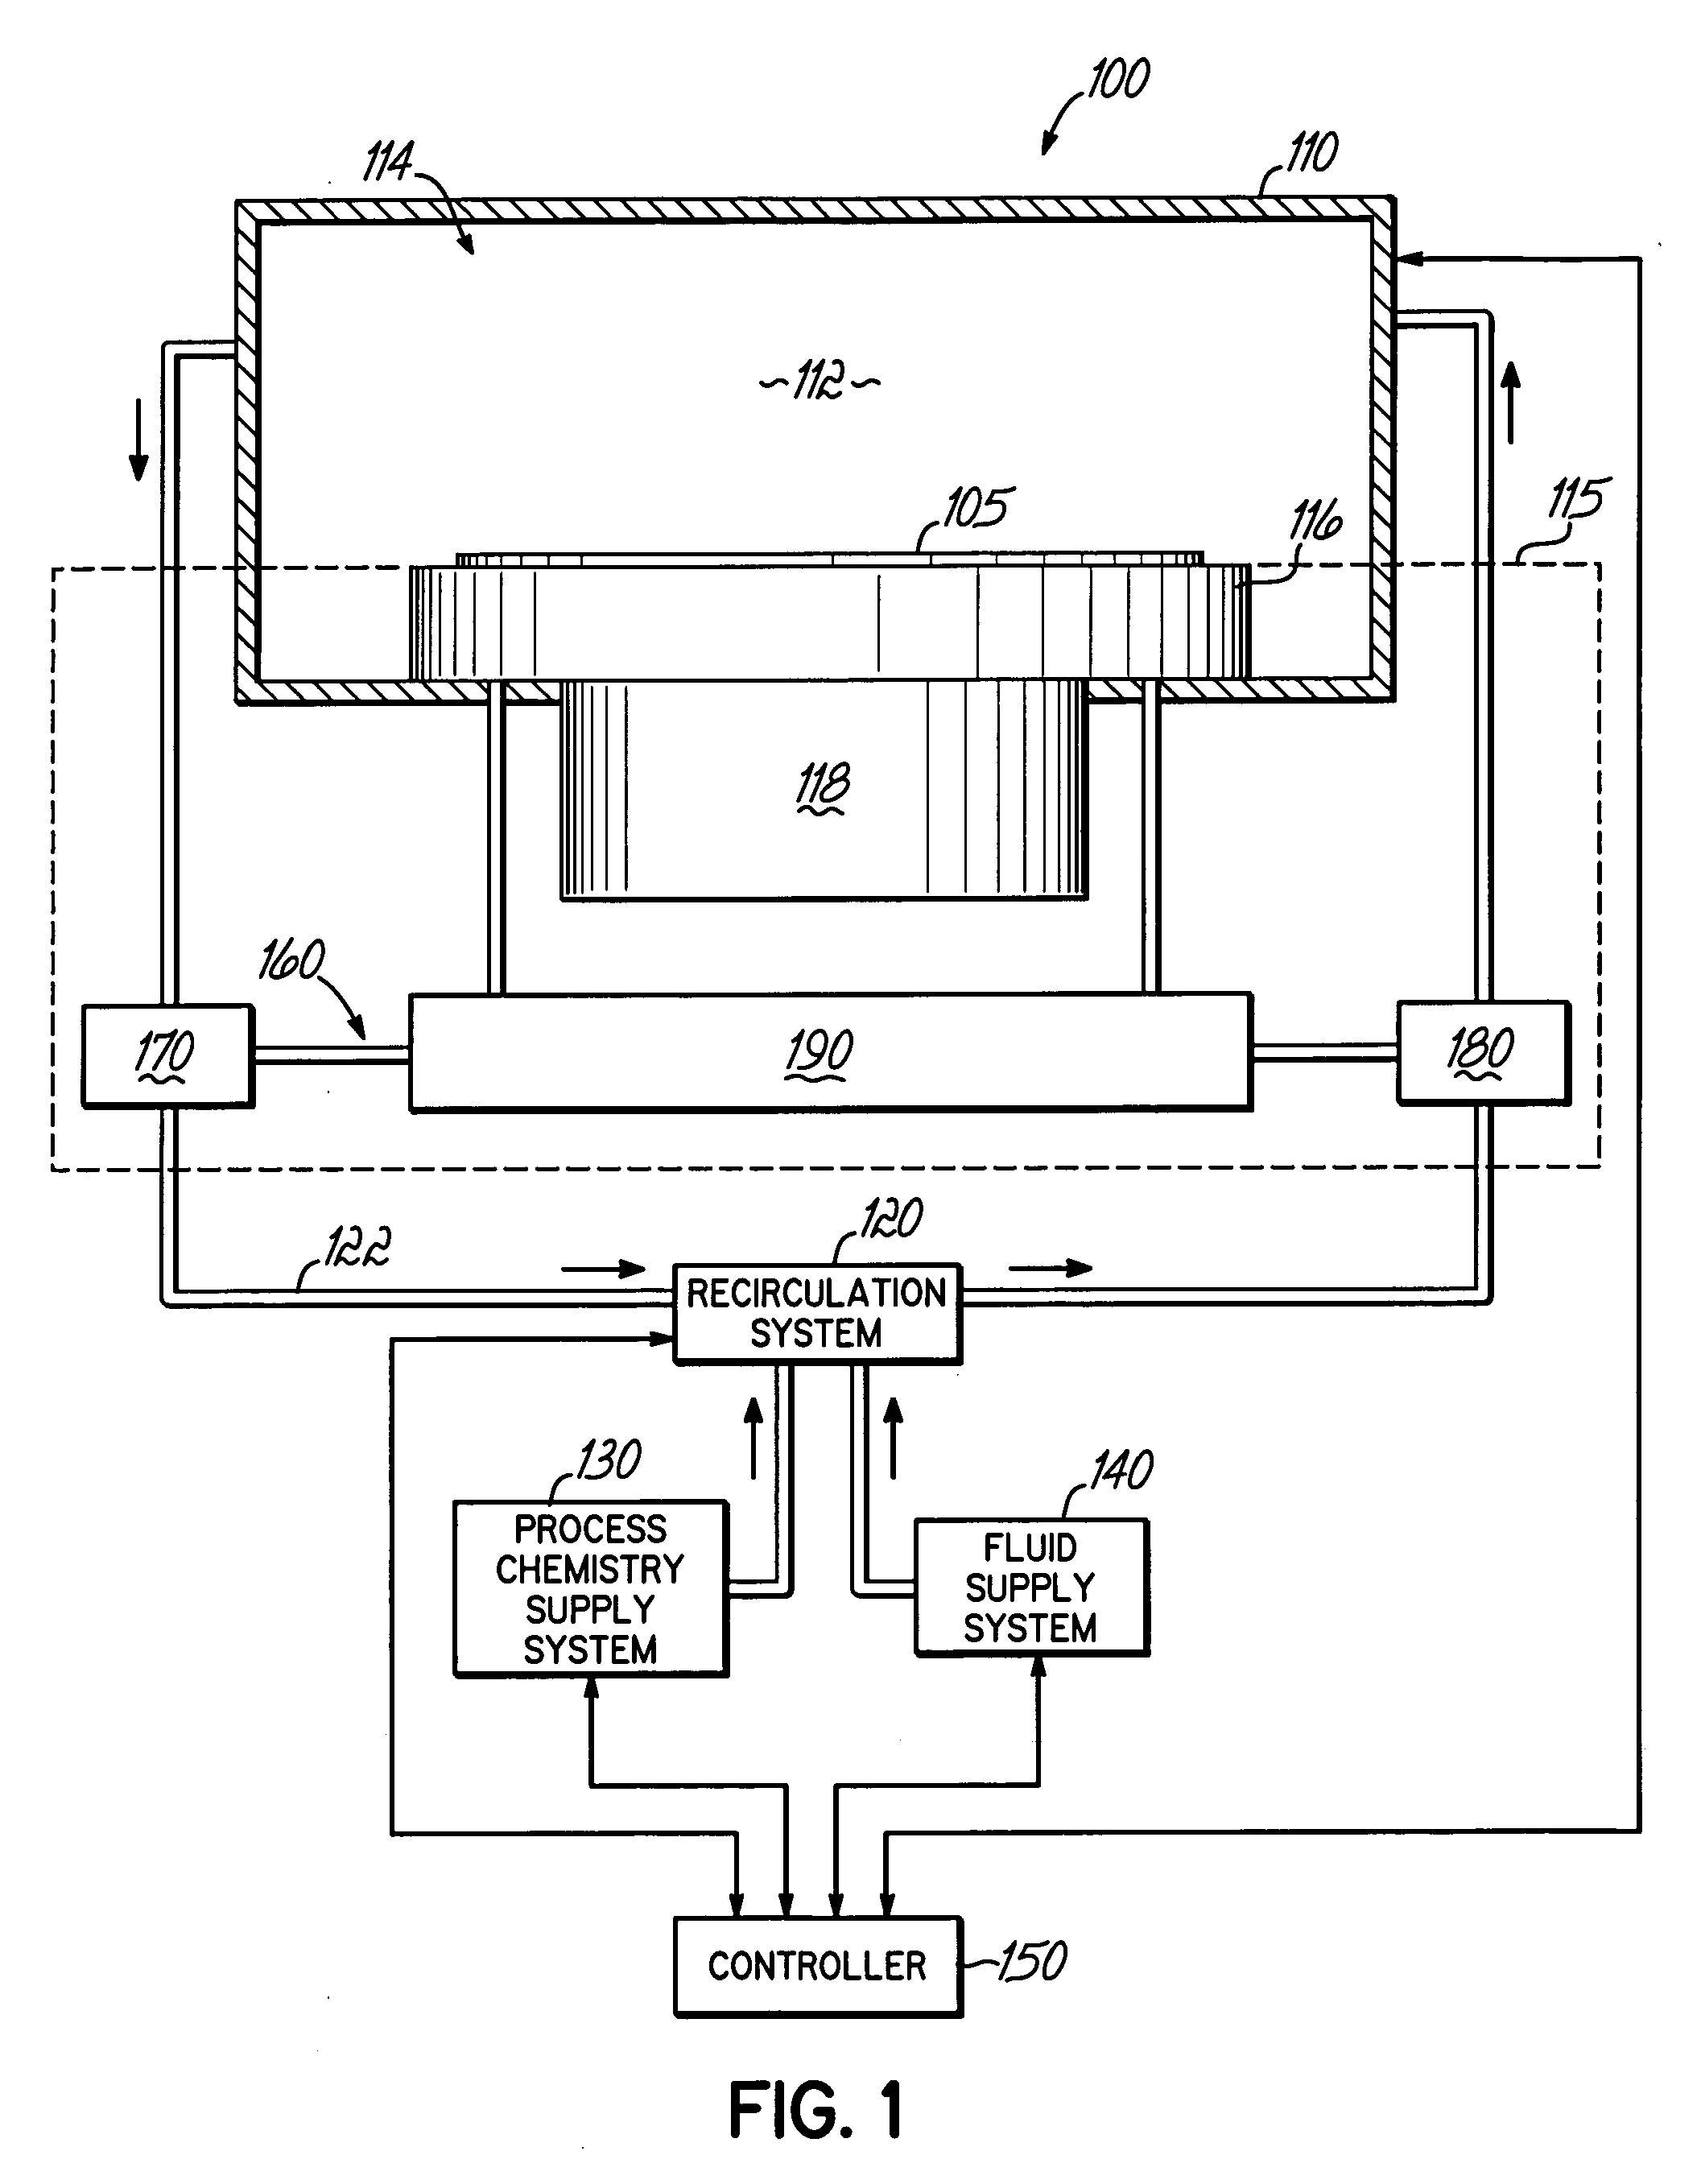 Method and apparatus for clamping a substrate in a high pressure processing system